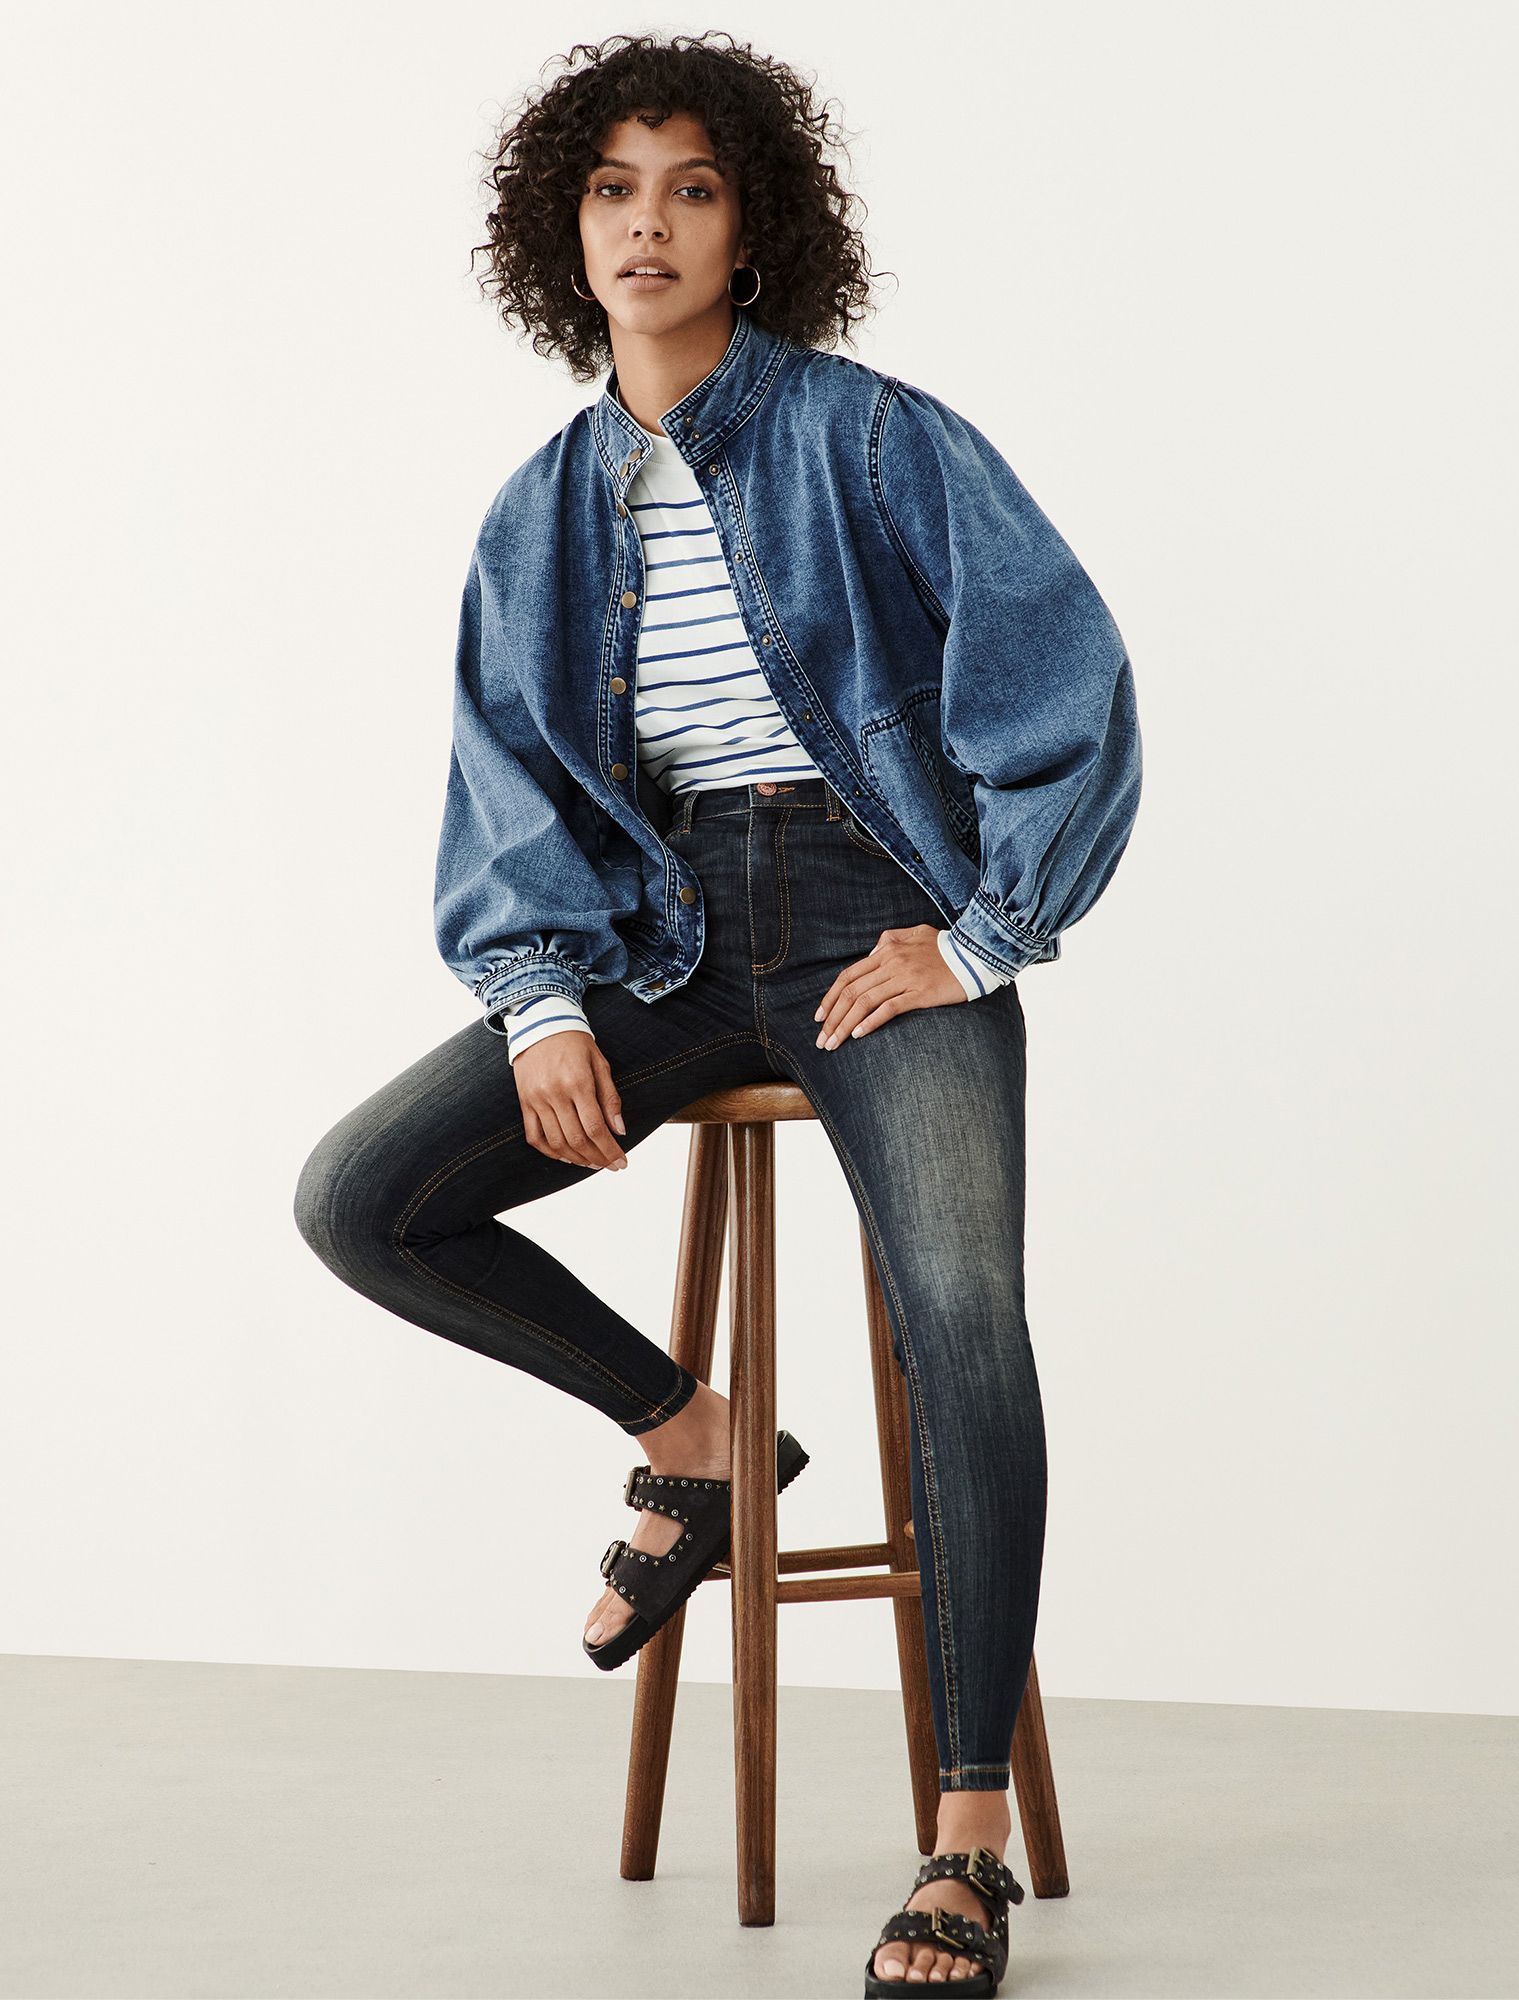 Women's jeans  Discover your perfect jeans online at ZALANDO